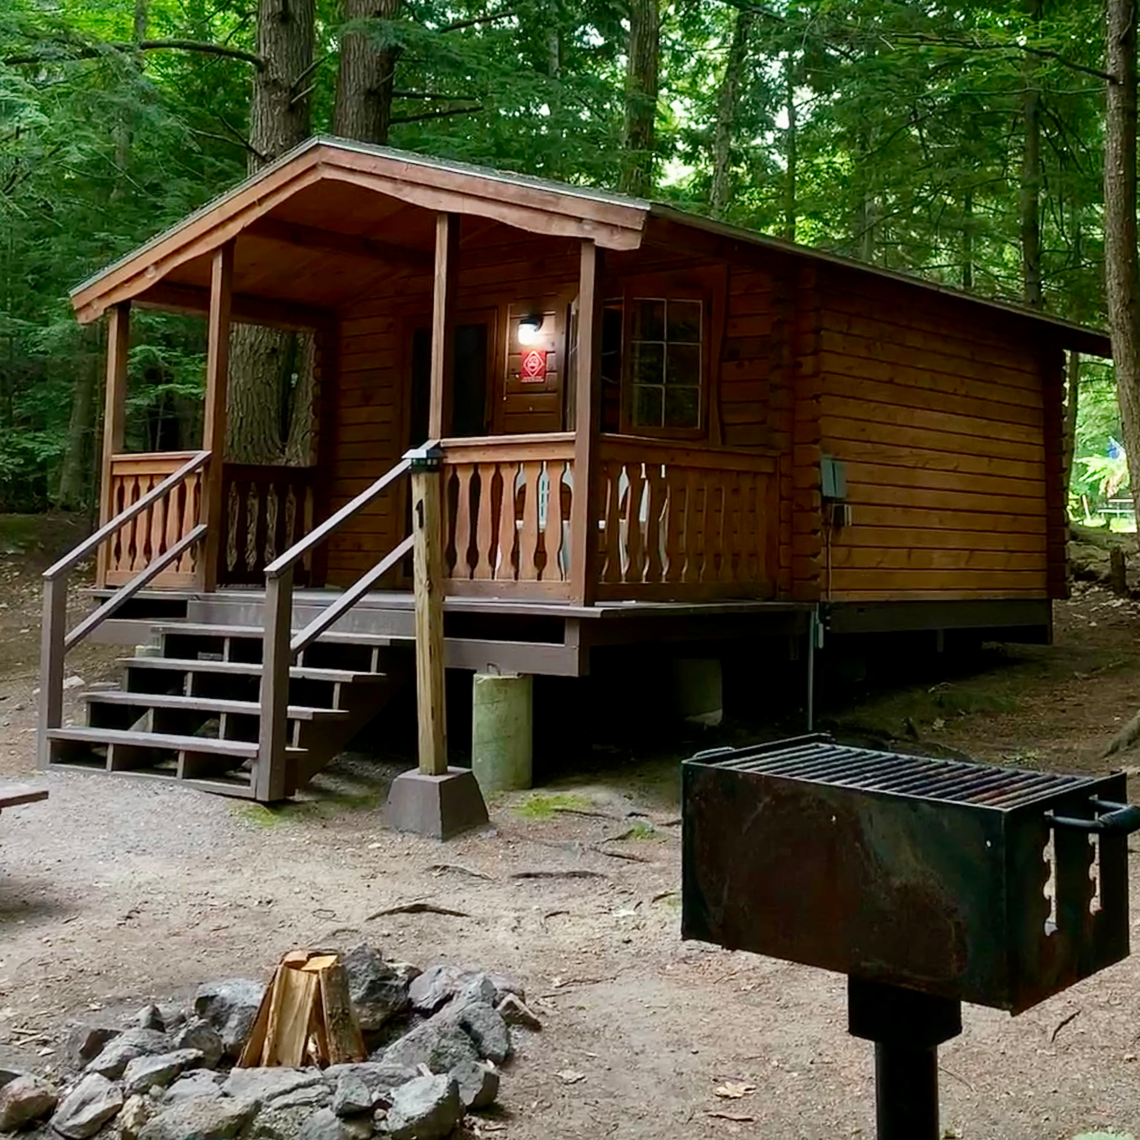 One of Gunstock's rustic cabins for a summer getaway.